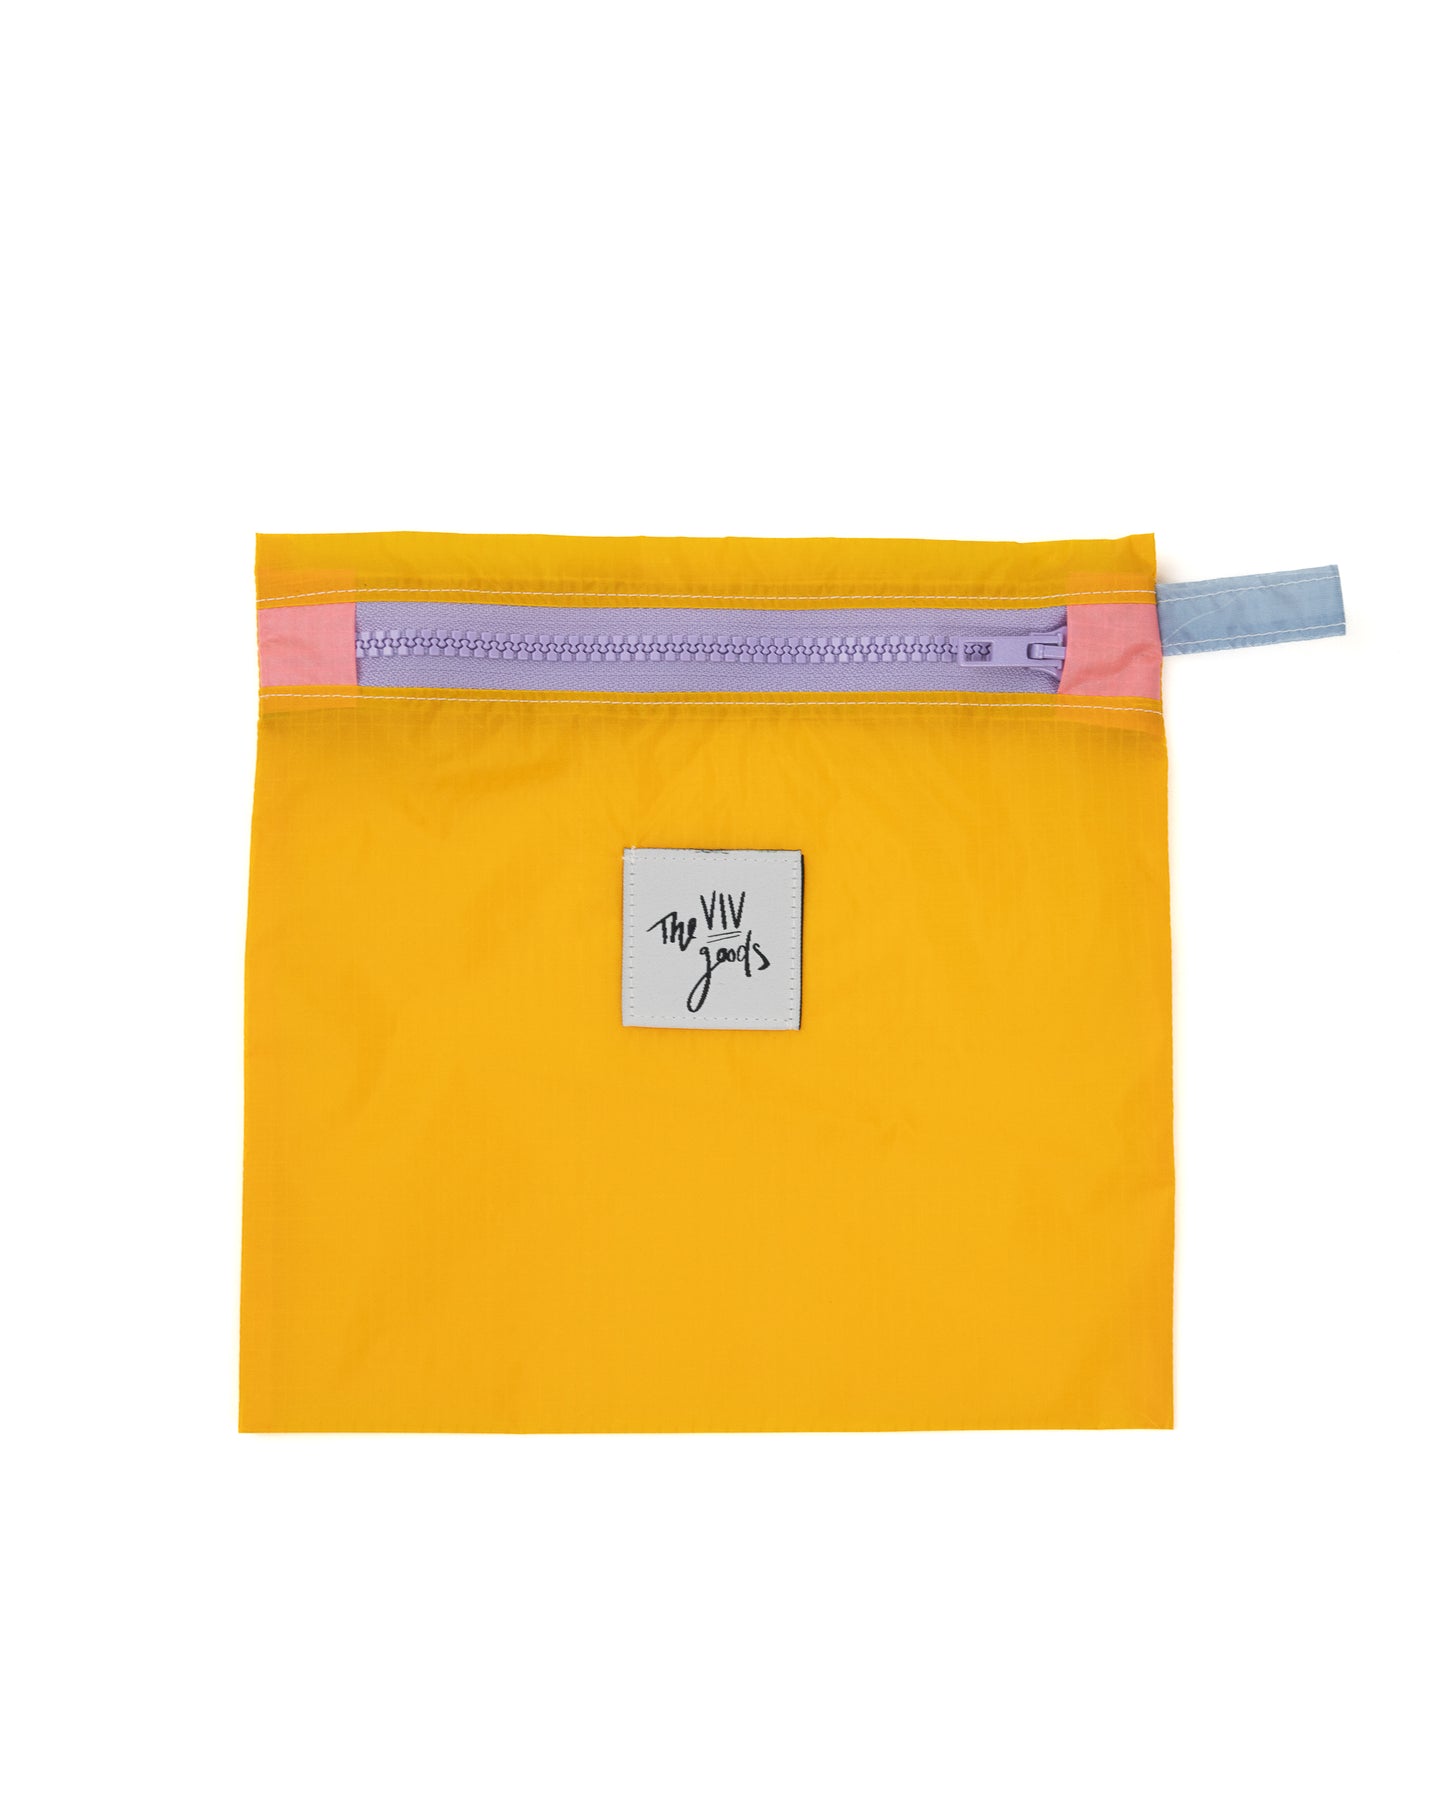 Mango colored square zipper pouch with lavender zipper. made from upcycled ripstop nylon